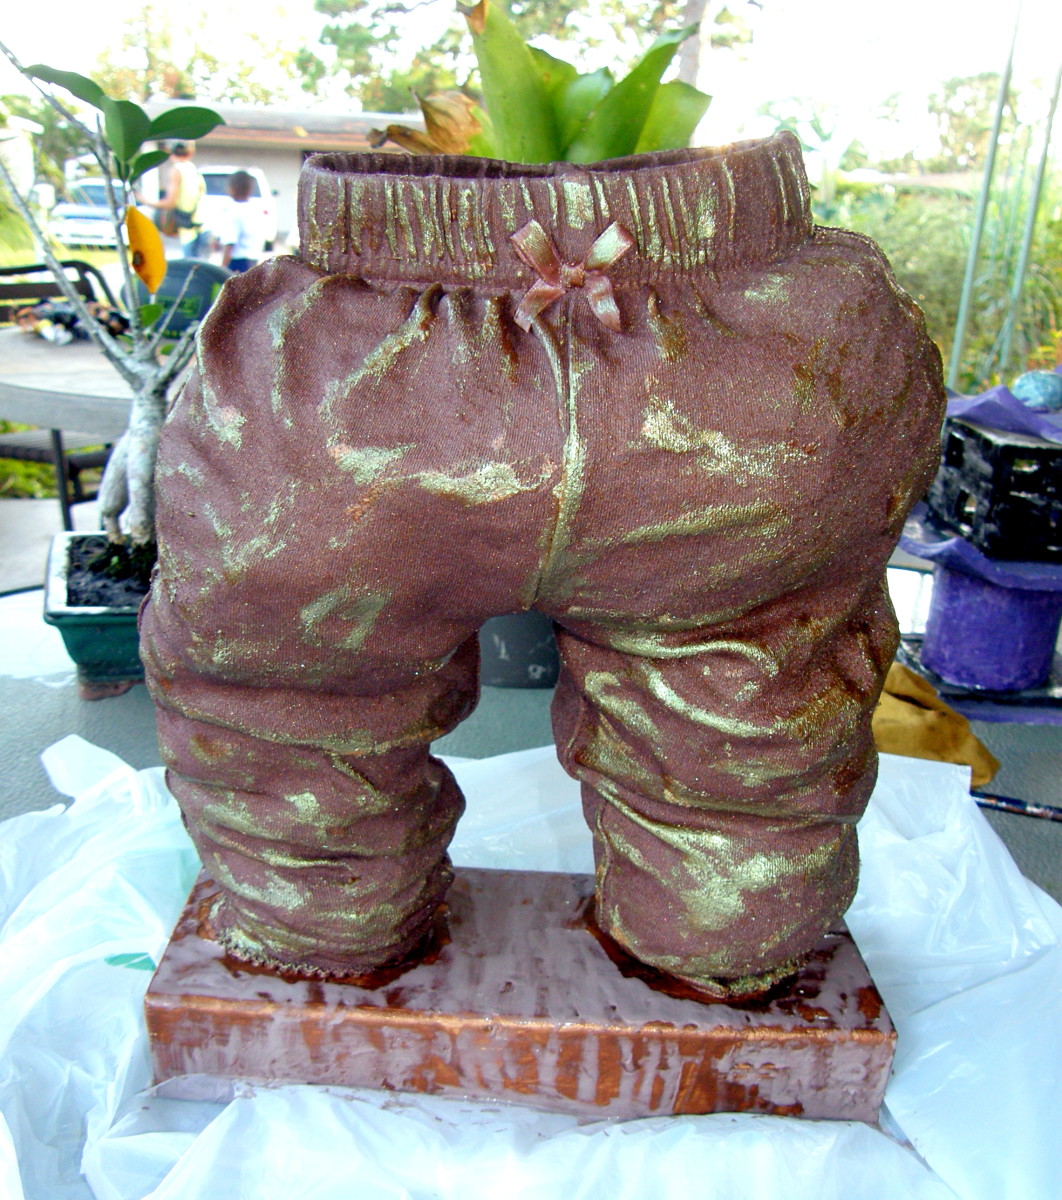 My grand-daughter out-grew this pair of pants, so I decided to create a sculpture with it using Paverpol.  It is now like bronze, and can even be used as a planter.